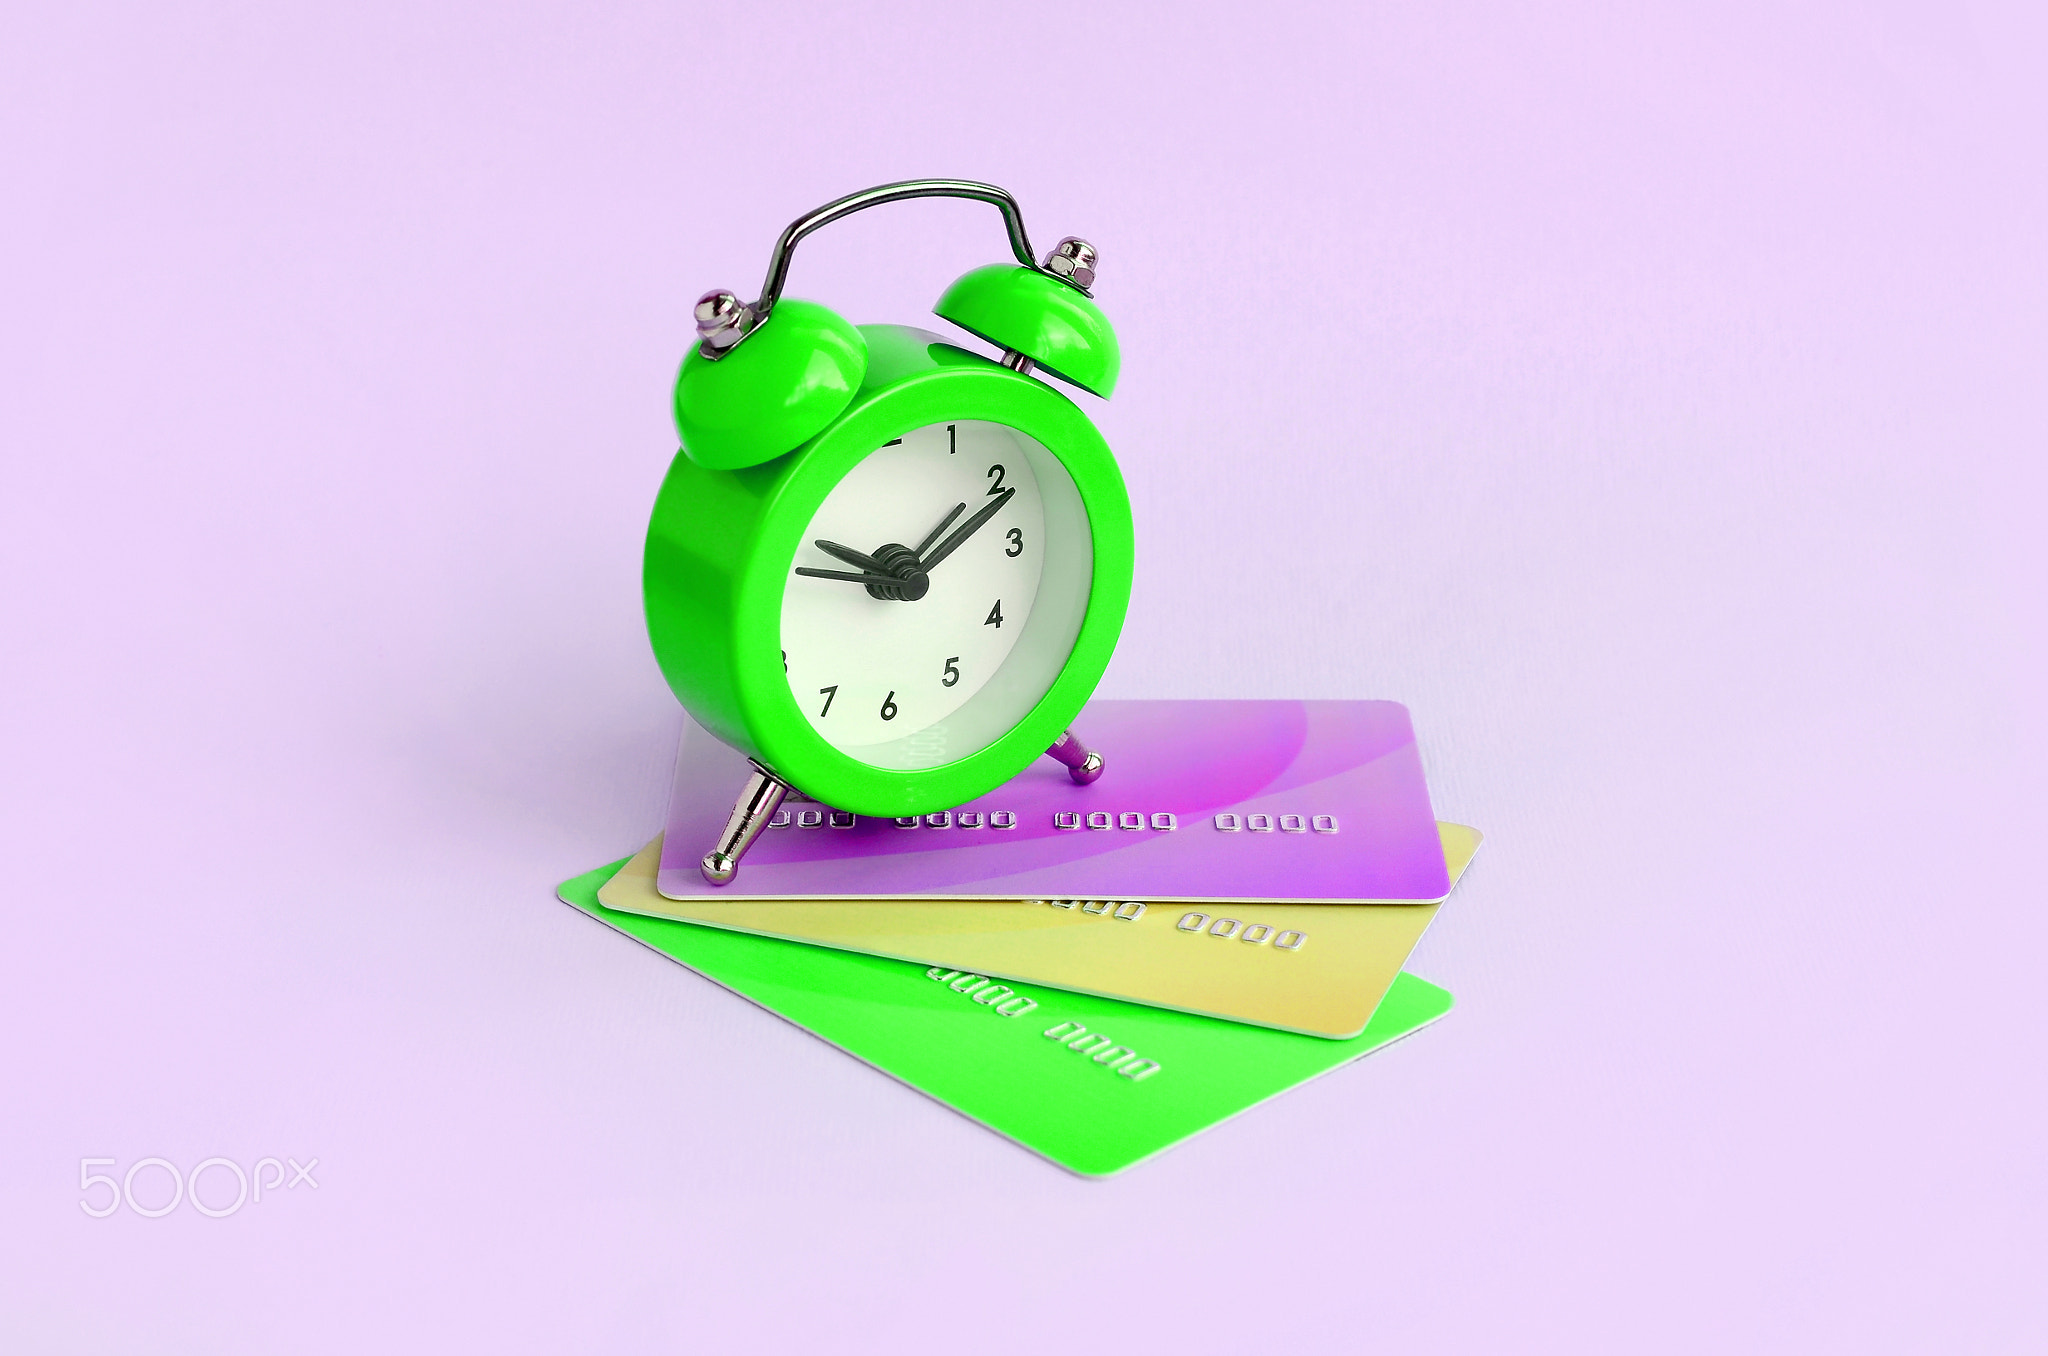 Small alarm clock lies on colored credit cards